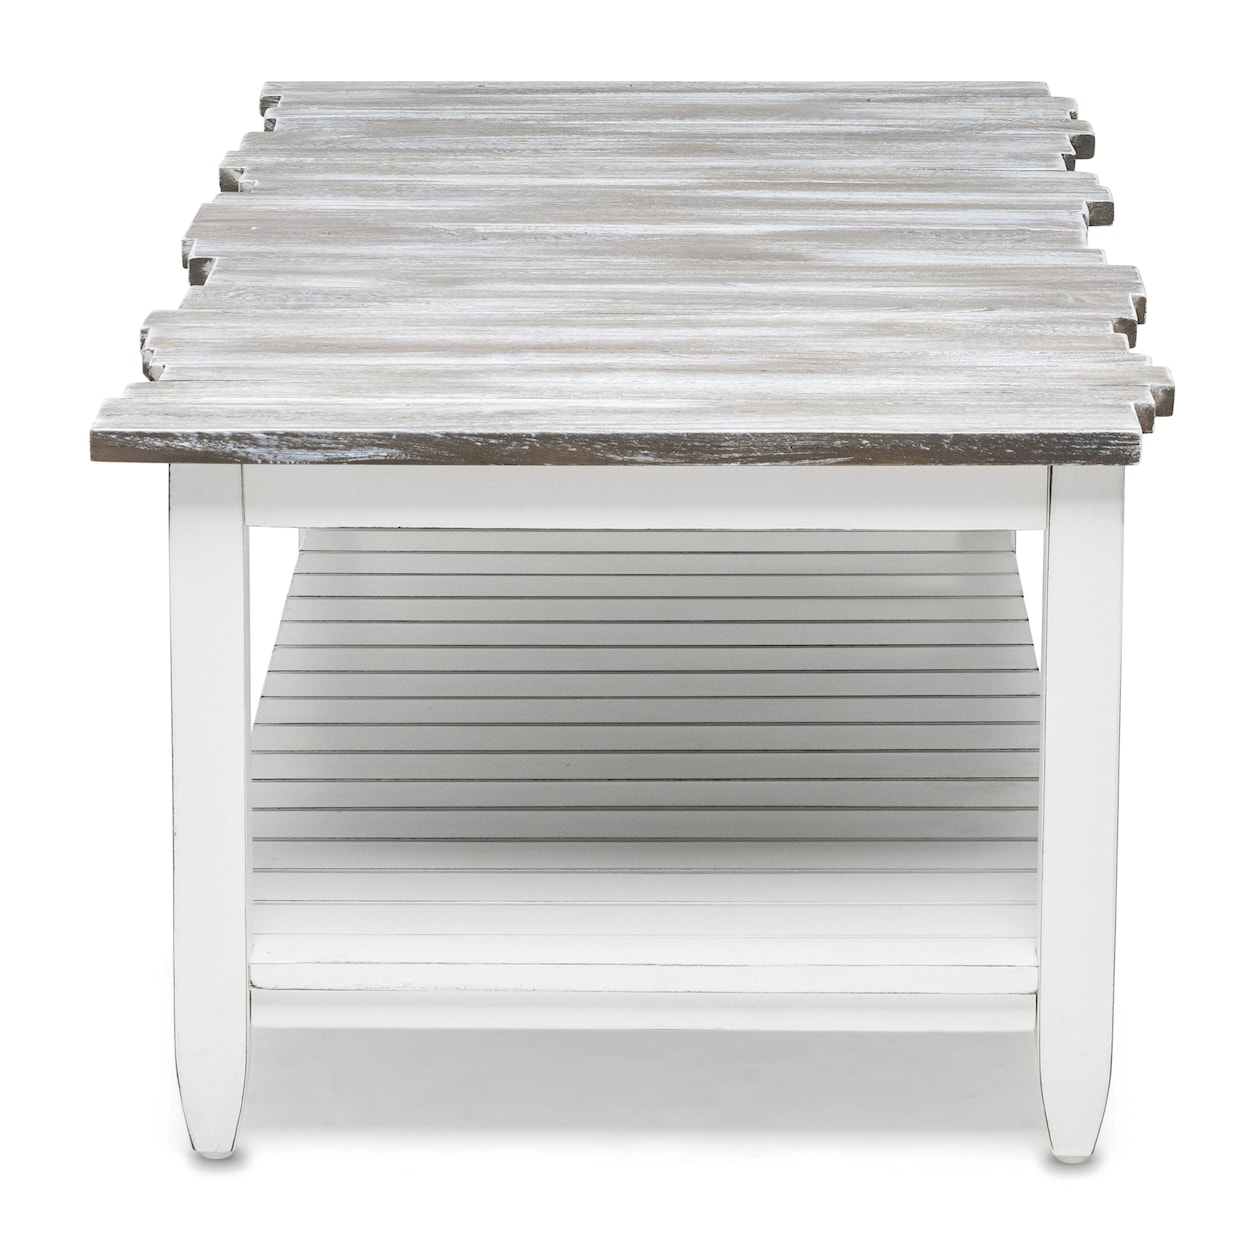 Sea Winds Trading Company Picket Fence Occasional Coffee Table